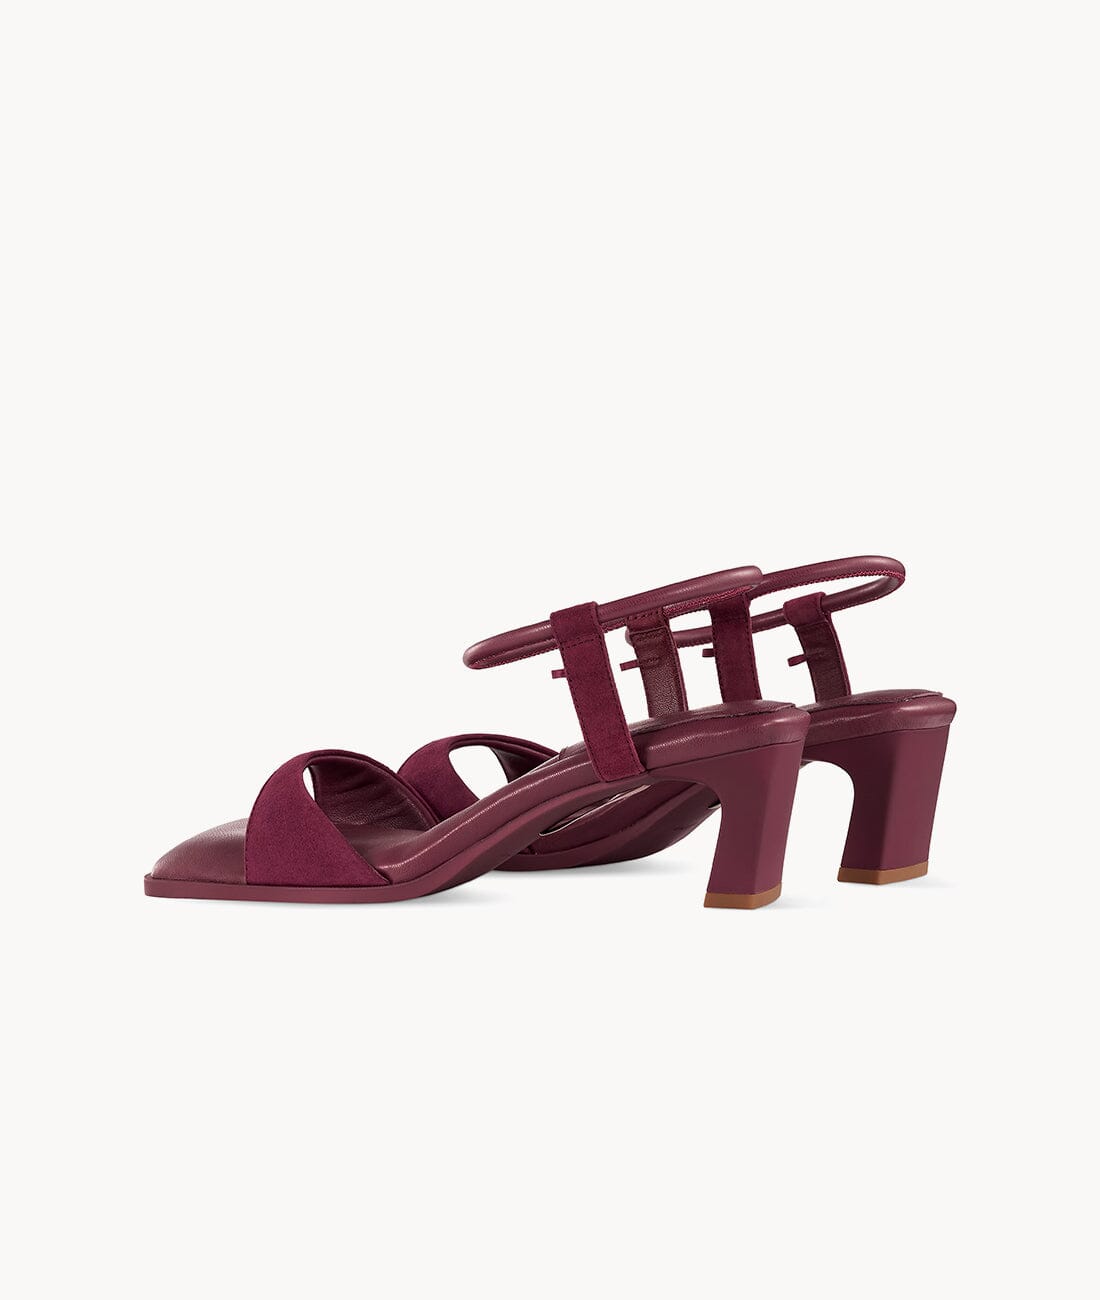 7or9 - Roselle - Sandals